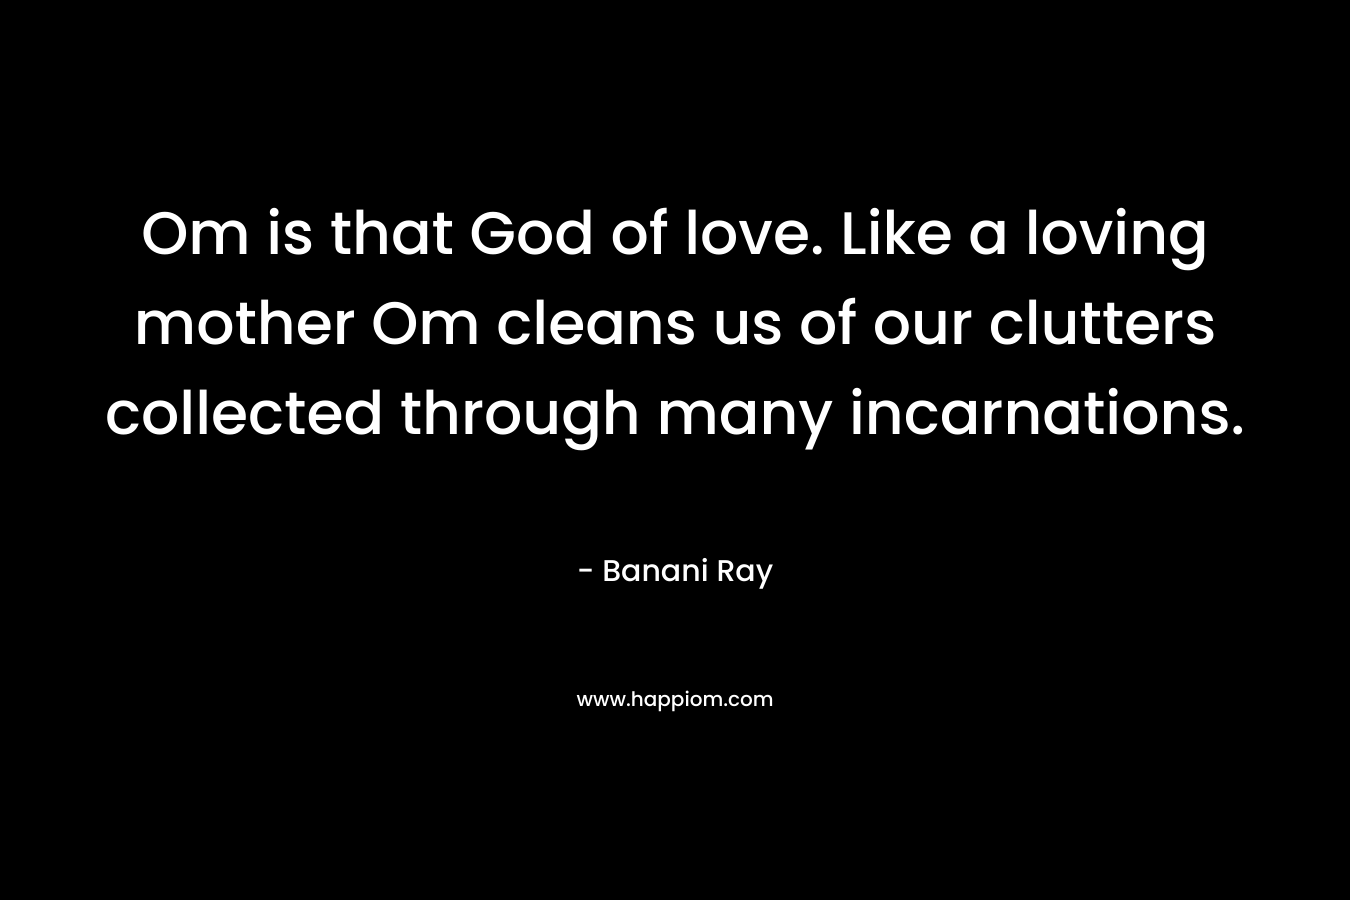 Om is that God of love. Like a loving mother Om cleans us of our clutters collected through many incarnations. – Banani Ray